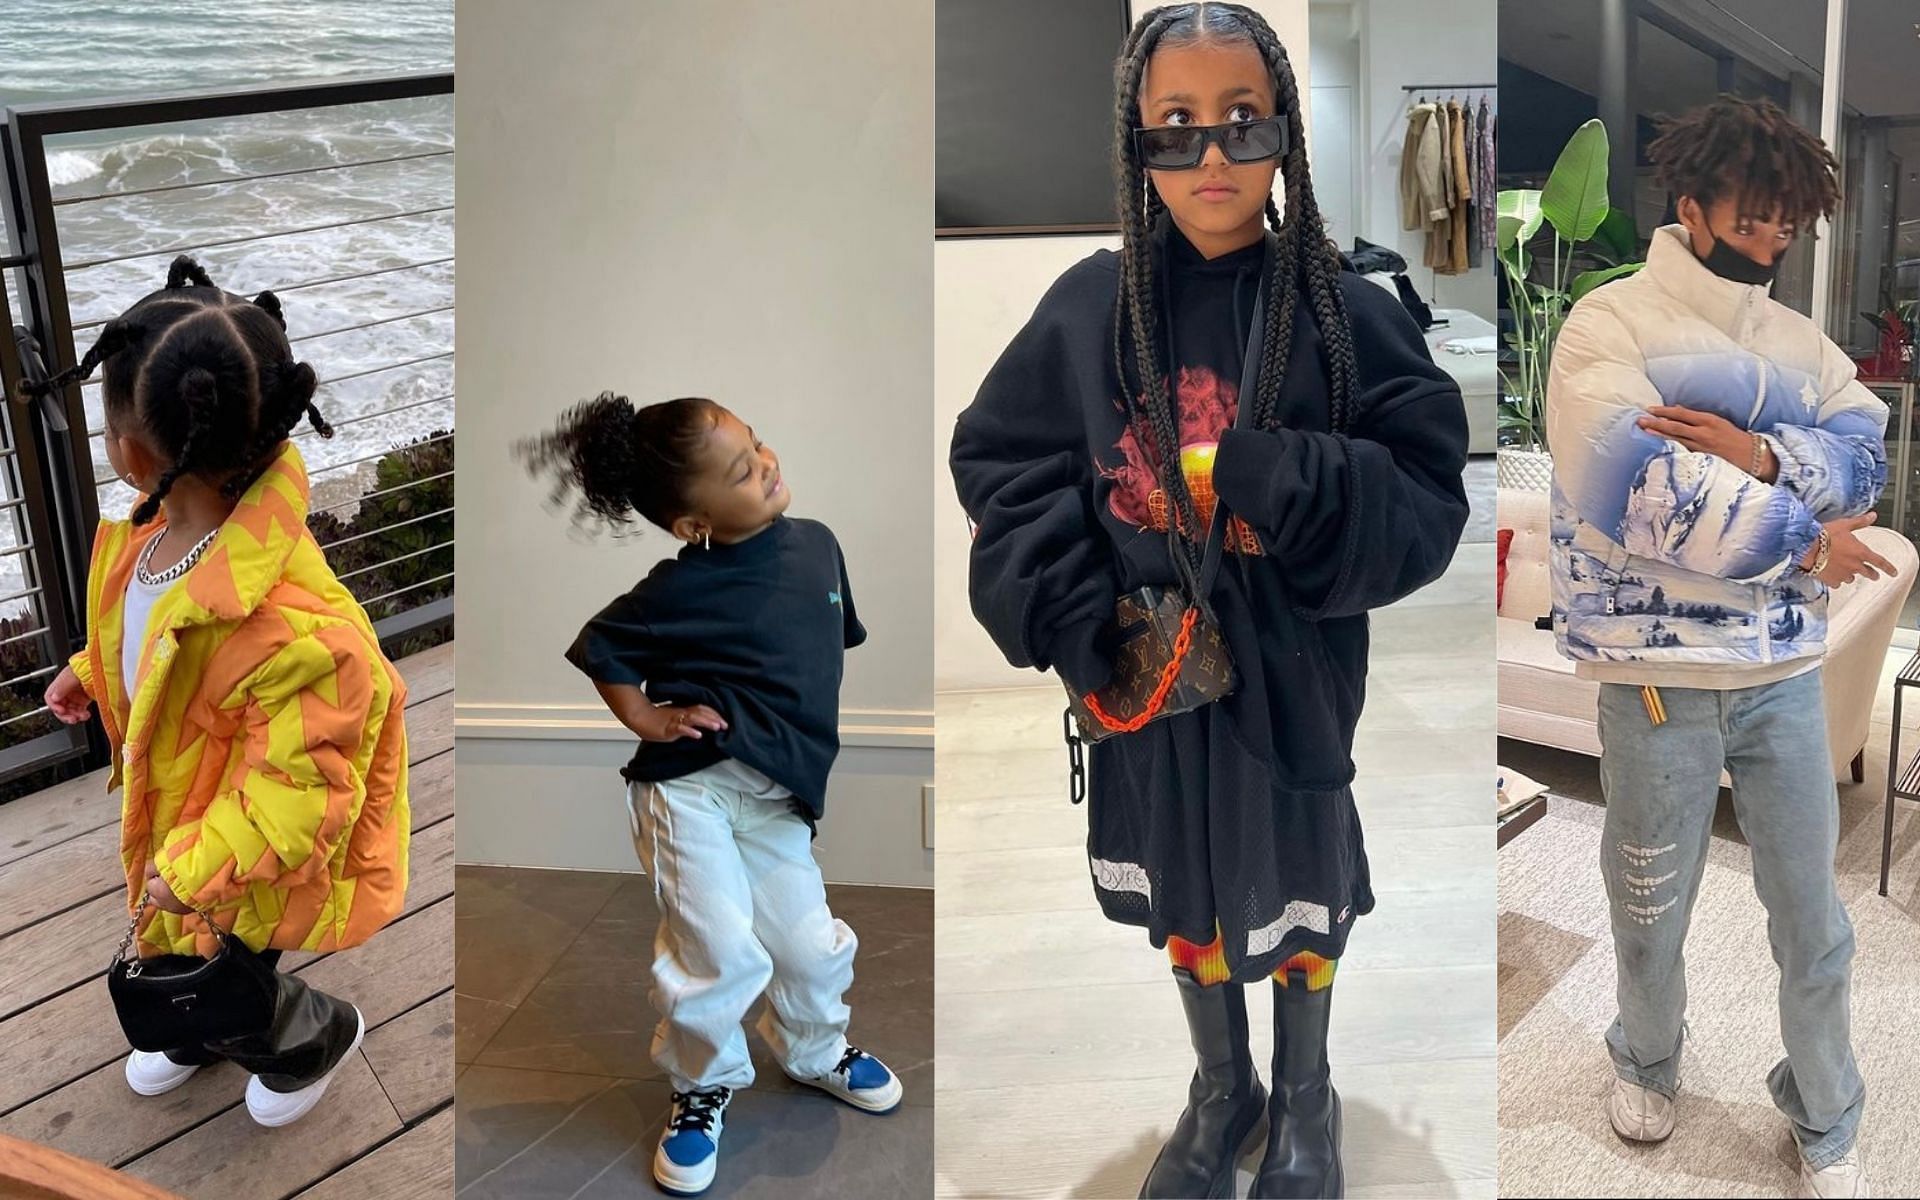 Stormi Webster, North West and Jaden Smith as fashion icons (Image via @kyliejenner/Instagram, @kimkardashian/Instagram, @c.syresmith/Instagram)